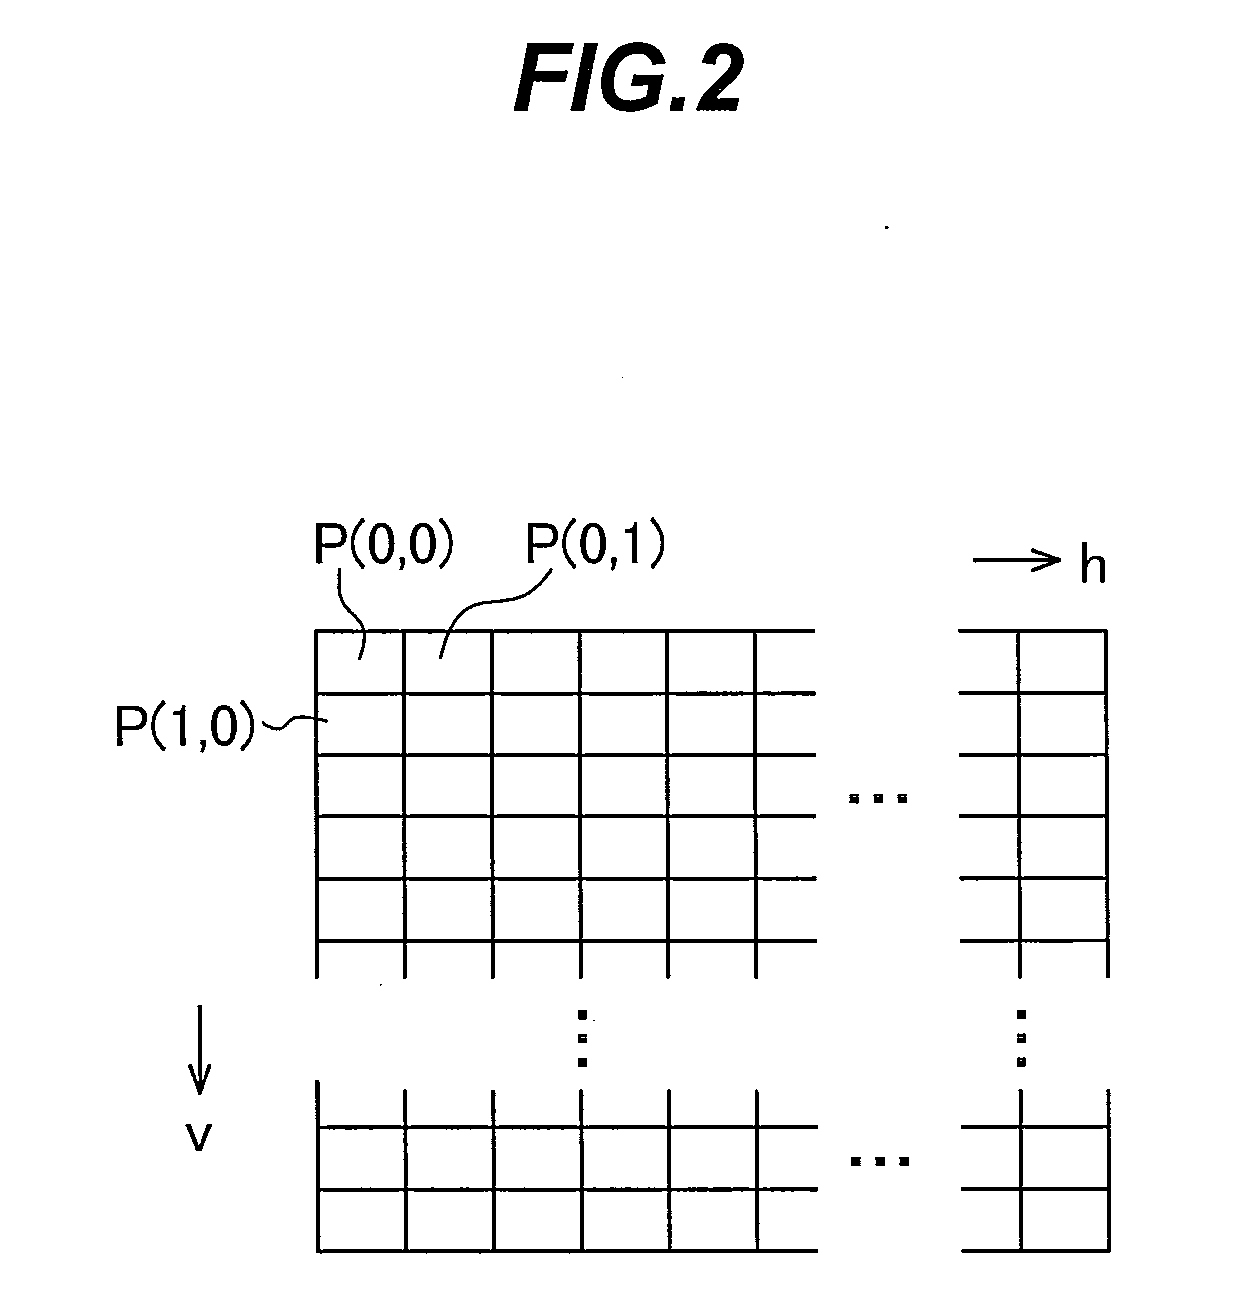 Content reproducing apparatus and method